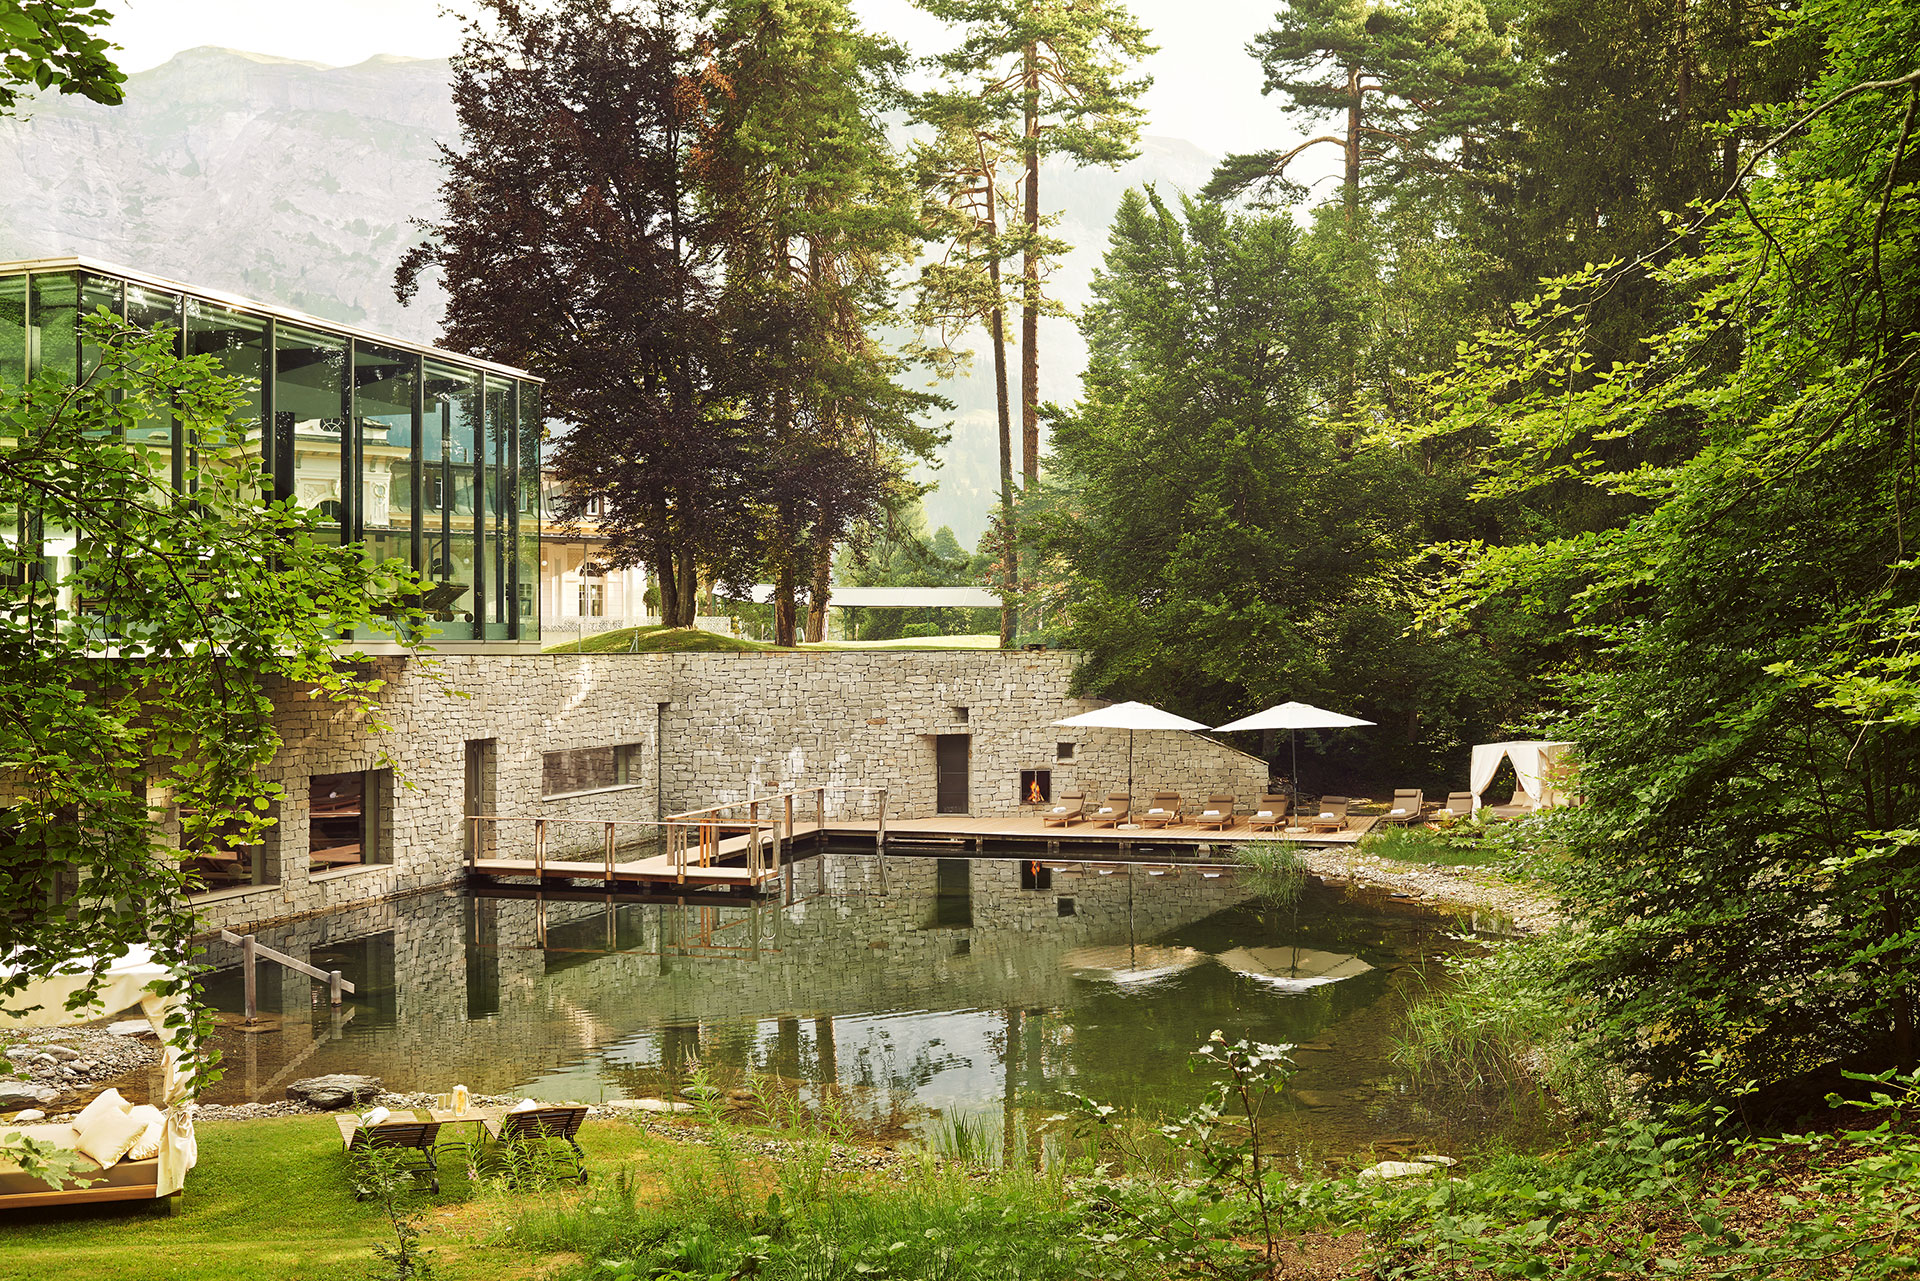 Landscape shot of the resort's pool. The pool is surrounded by lush greenery. The pool leads into the spa and there is a wooden bridge that leads guests inside to the outside and vice versa. Lining the pool are brown lounge chairs and white umbrellas. In the background there is a view of the swiss alps